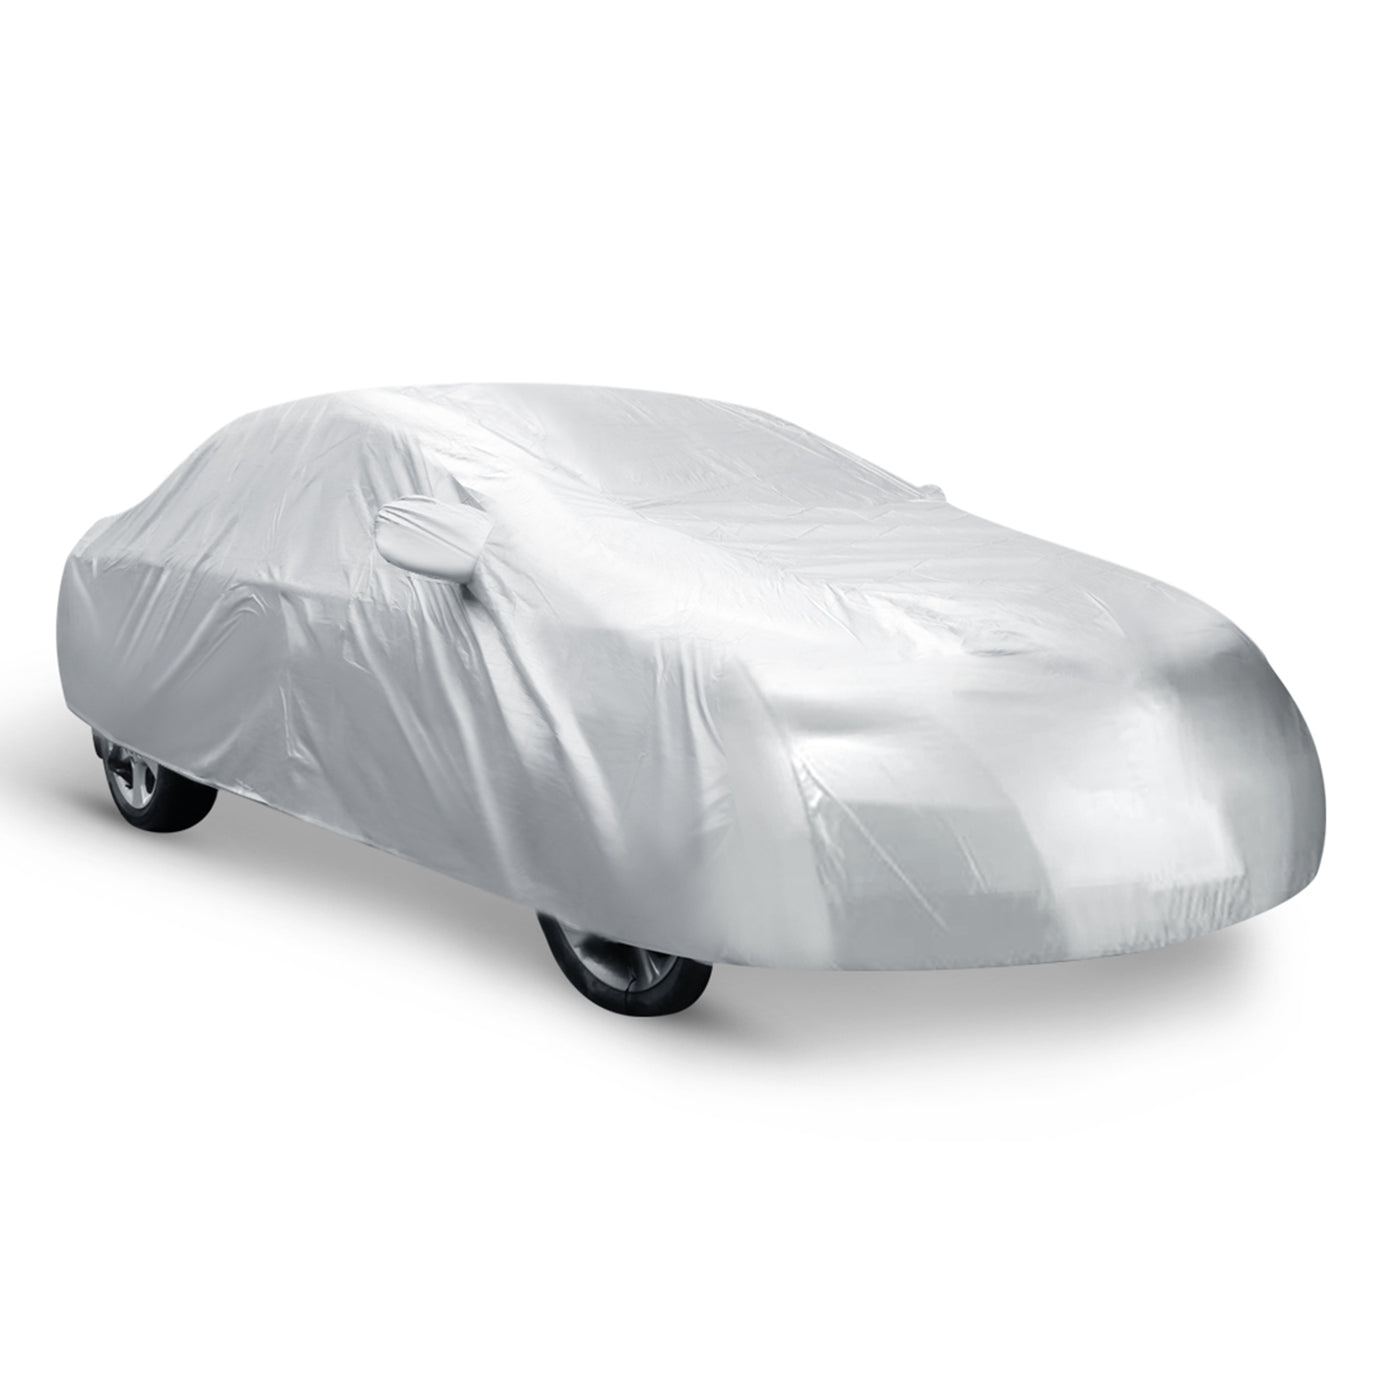 uxcell Uxcell XXL Car Cover Waterproof Sun Snow Dust Rain Resistant Protection 5.35M x 2M x 1.6M